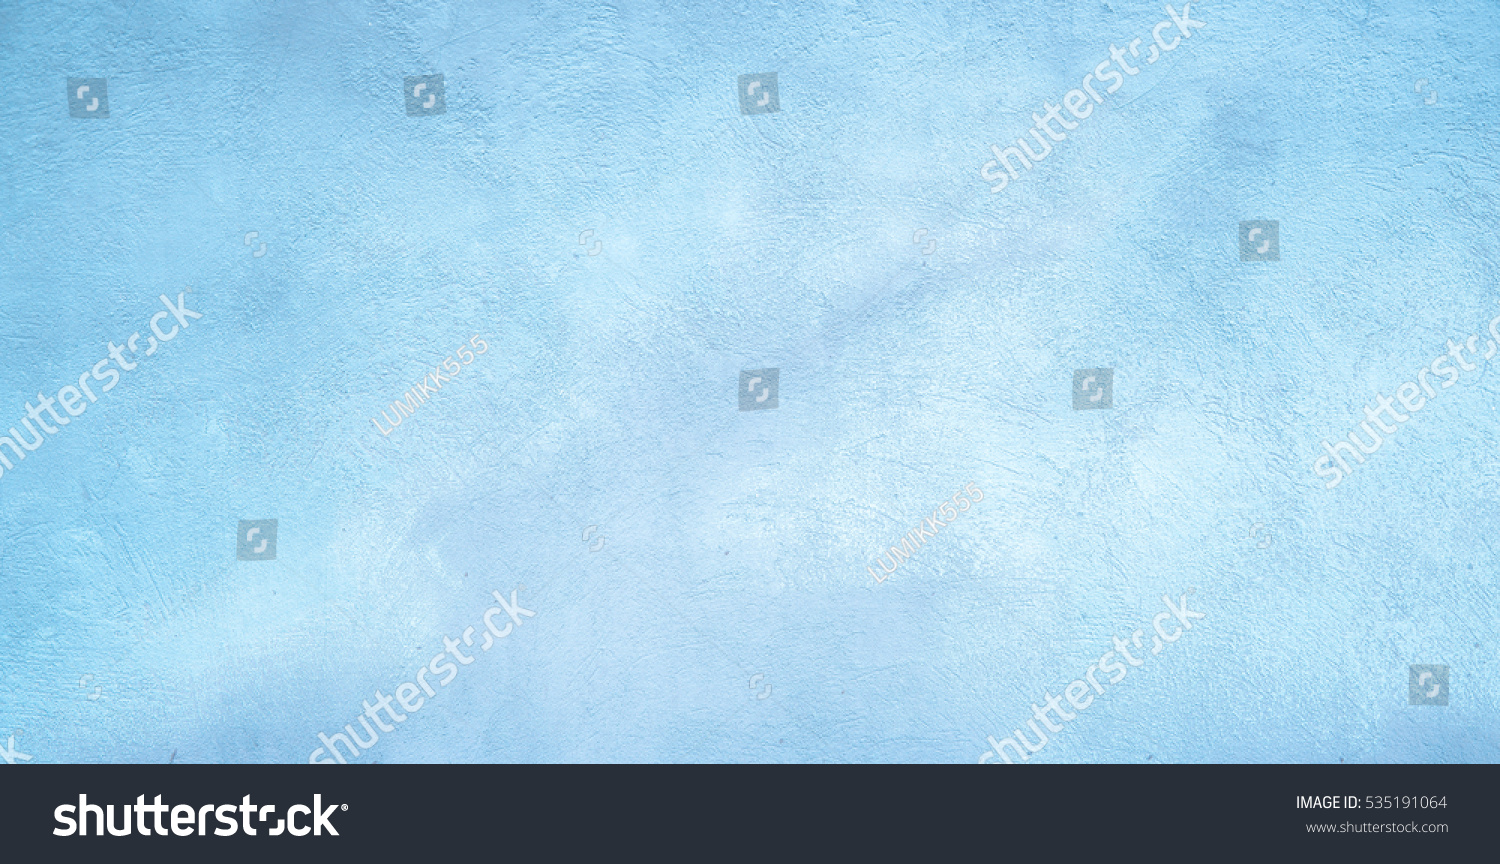 Abstract Grunge Decorative Light Blue Plaster Wall Background with Winter Pattern. Rough Stylized Texture Wide Screen With Copy Space for Design.  #535191064